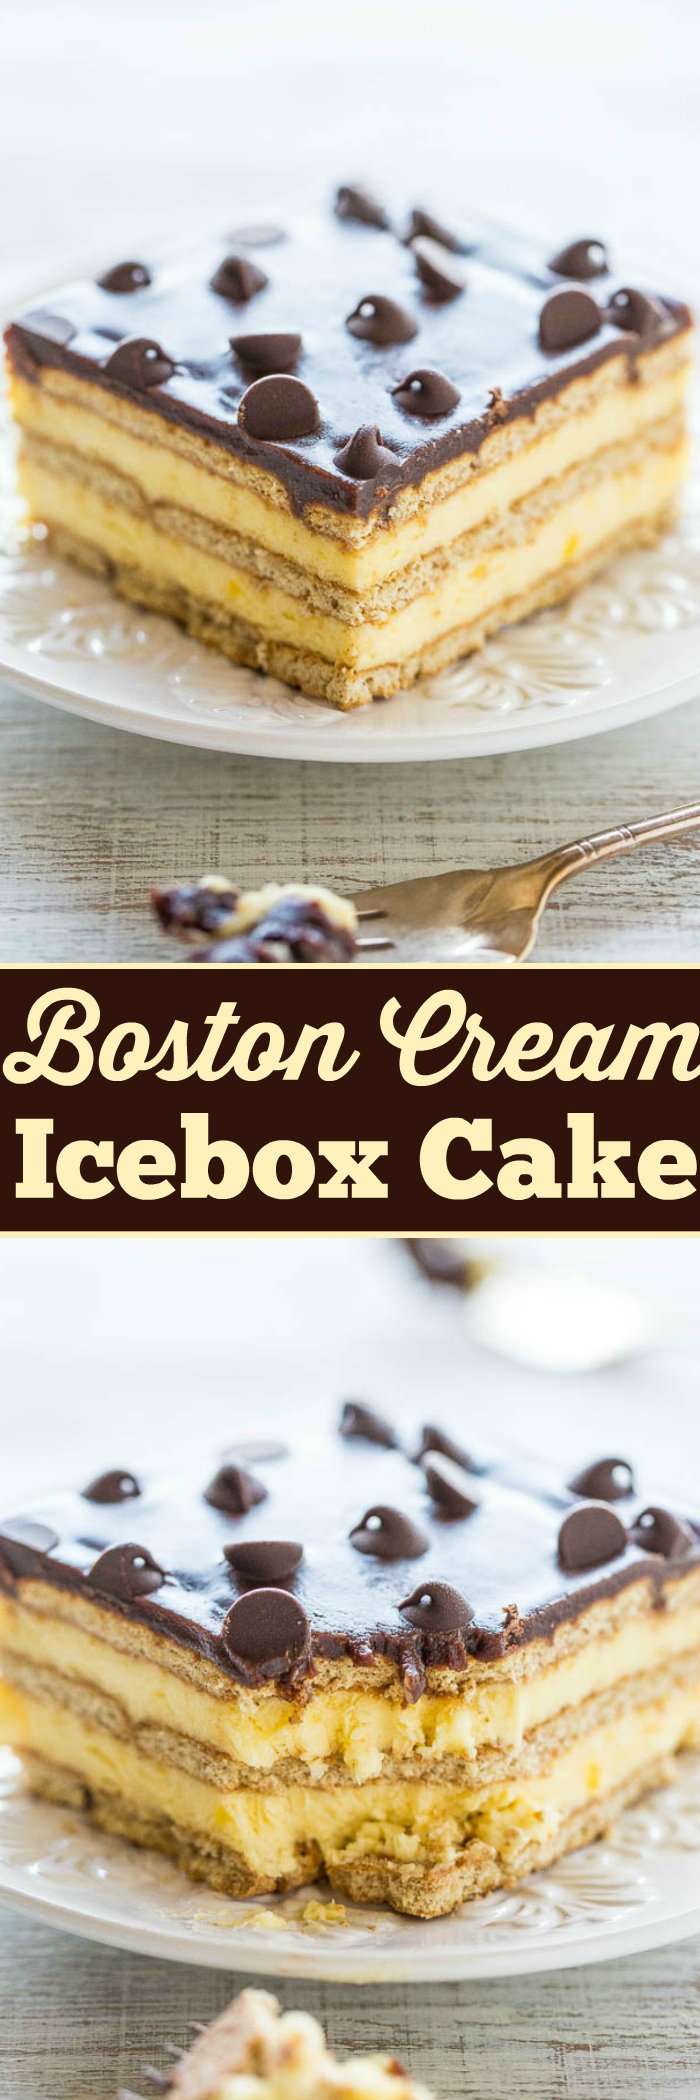 Boston Cream Icebox Cake - Boston cream PIE meets an ECLAIR in an easy no-mixer, no-bake dessert!! Vanilla pudding, whipped topping, graham crackers, and lots of chocolate! Perfect for parties or anytime you don't want to turn on your oven!!